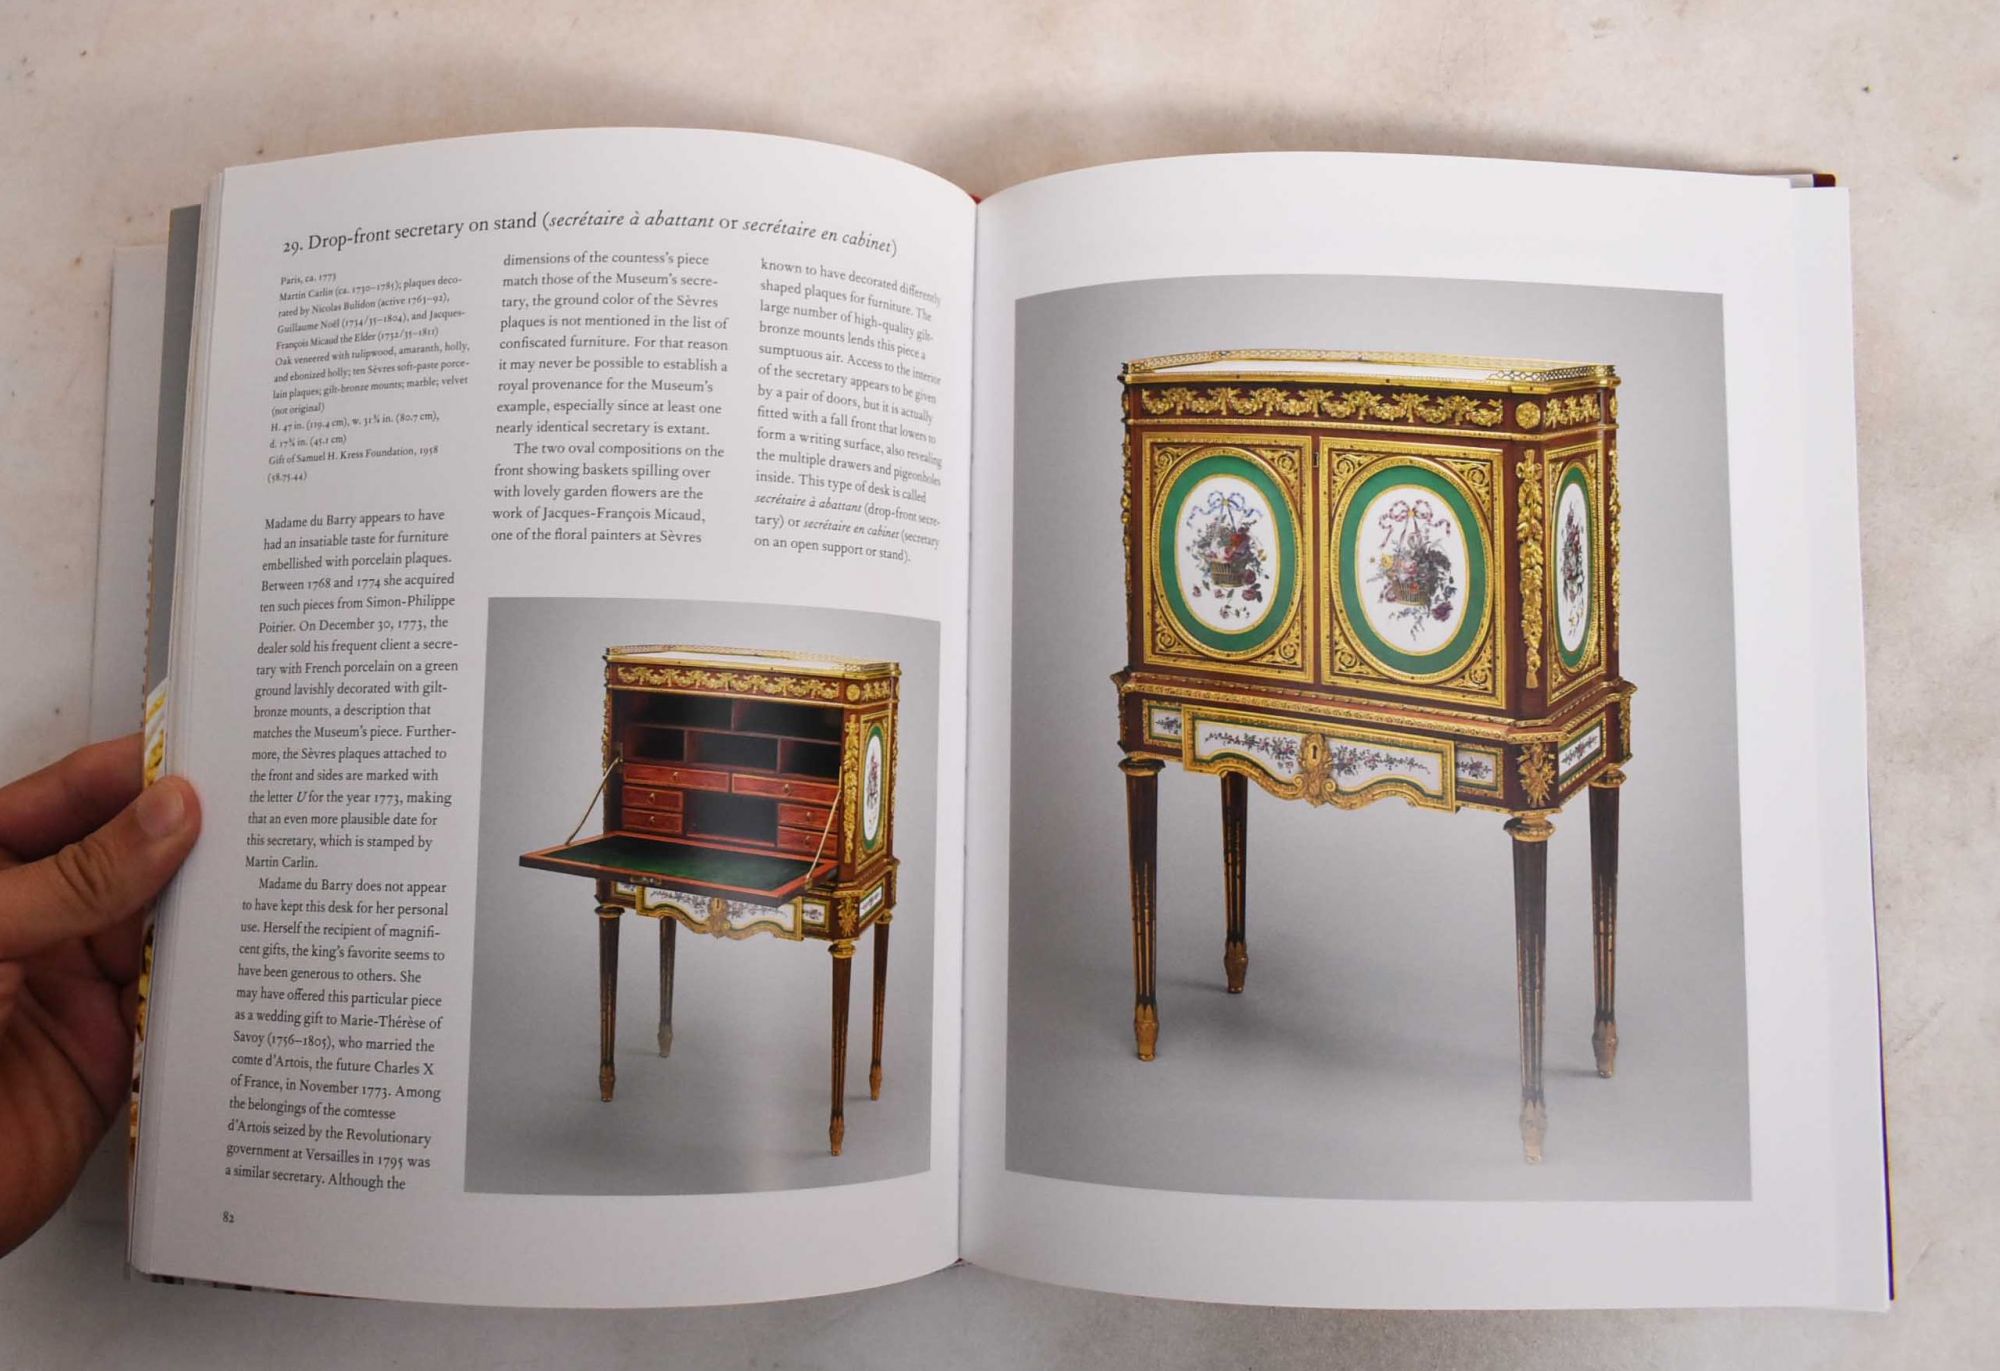 The Wrightsman Galleries for French Decorative Arts: The